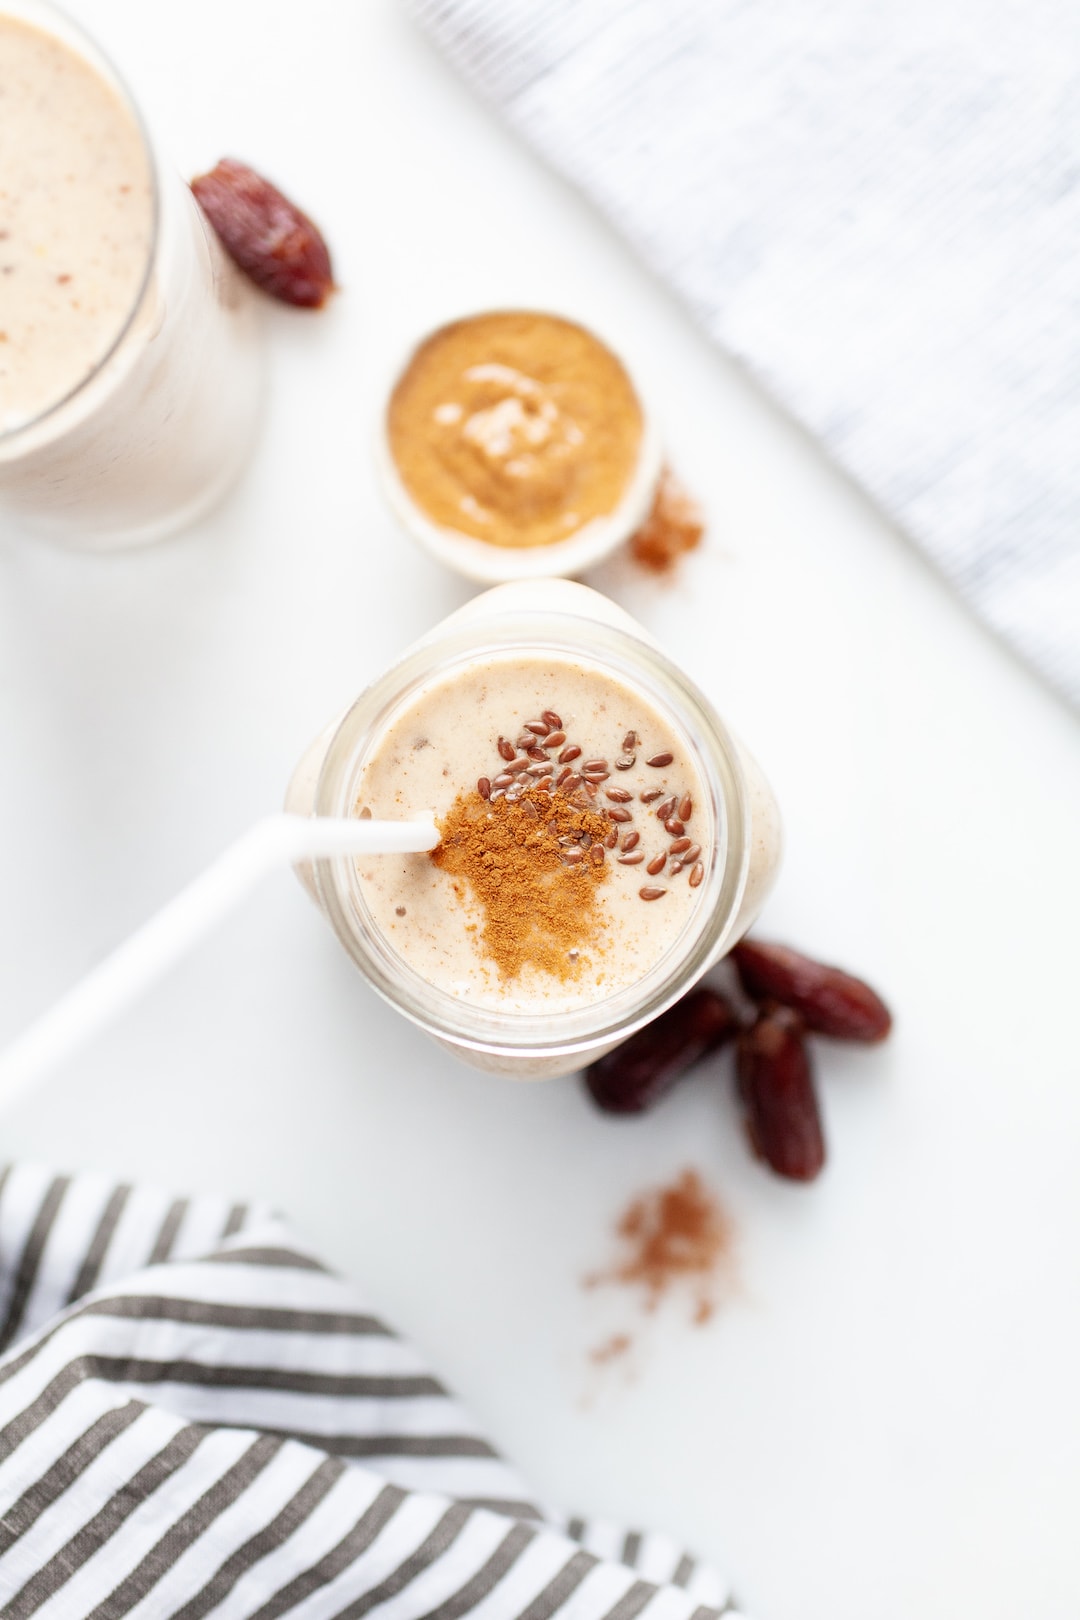 Banana Almond Butter Date Smoothie Recipe with vanilla protein